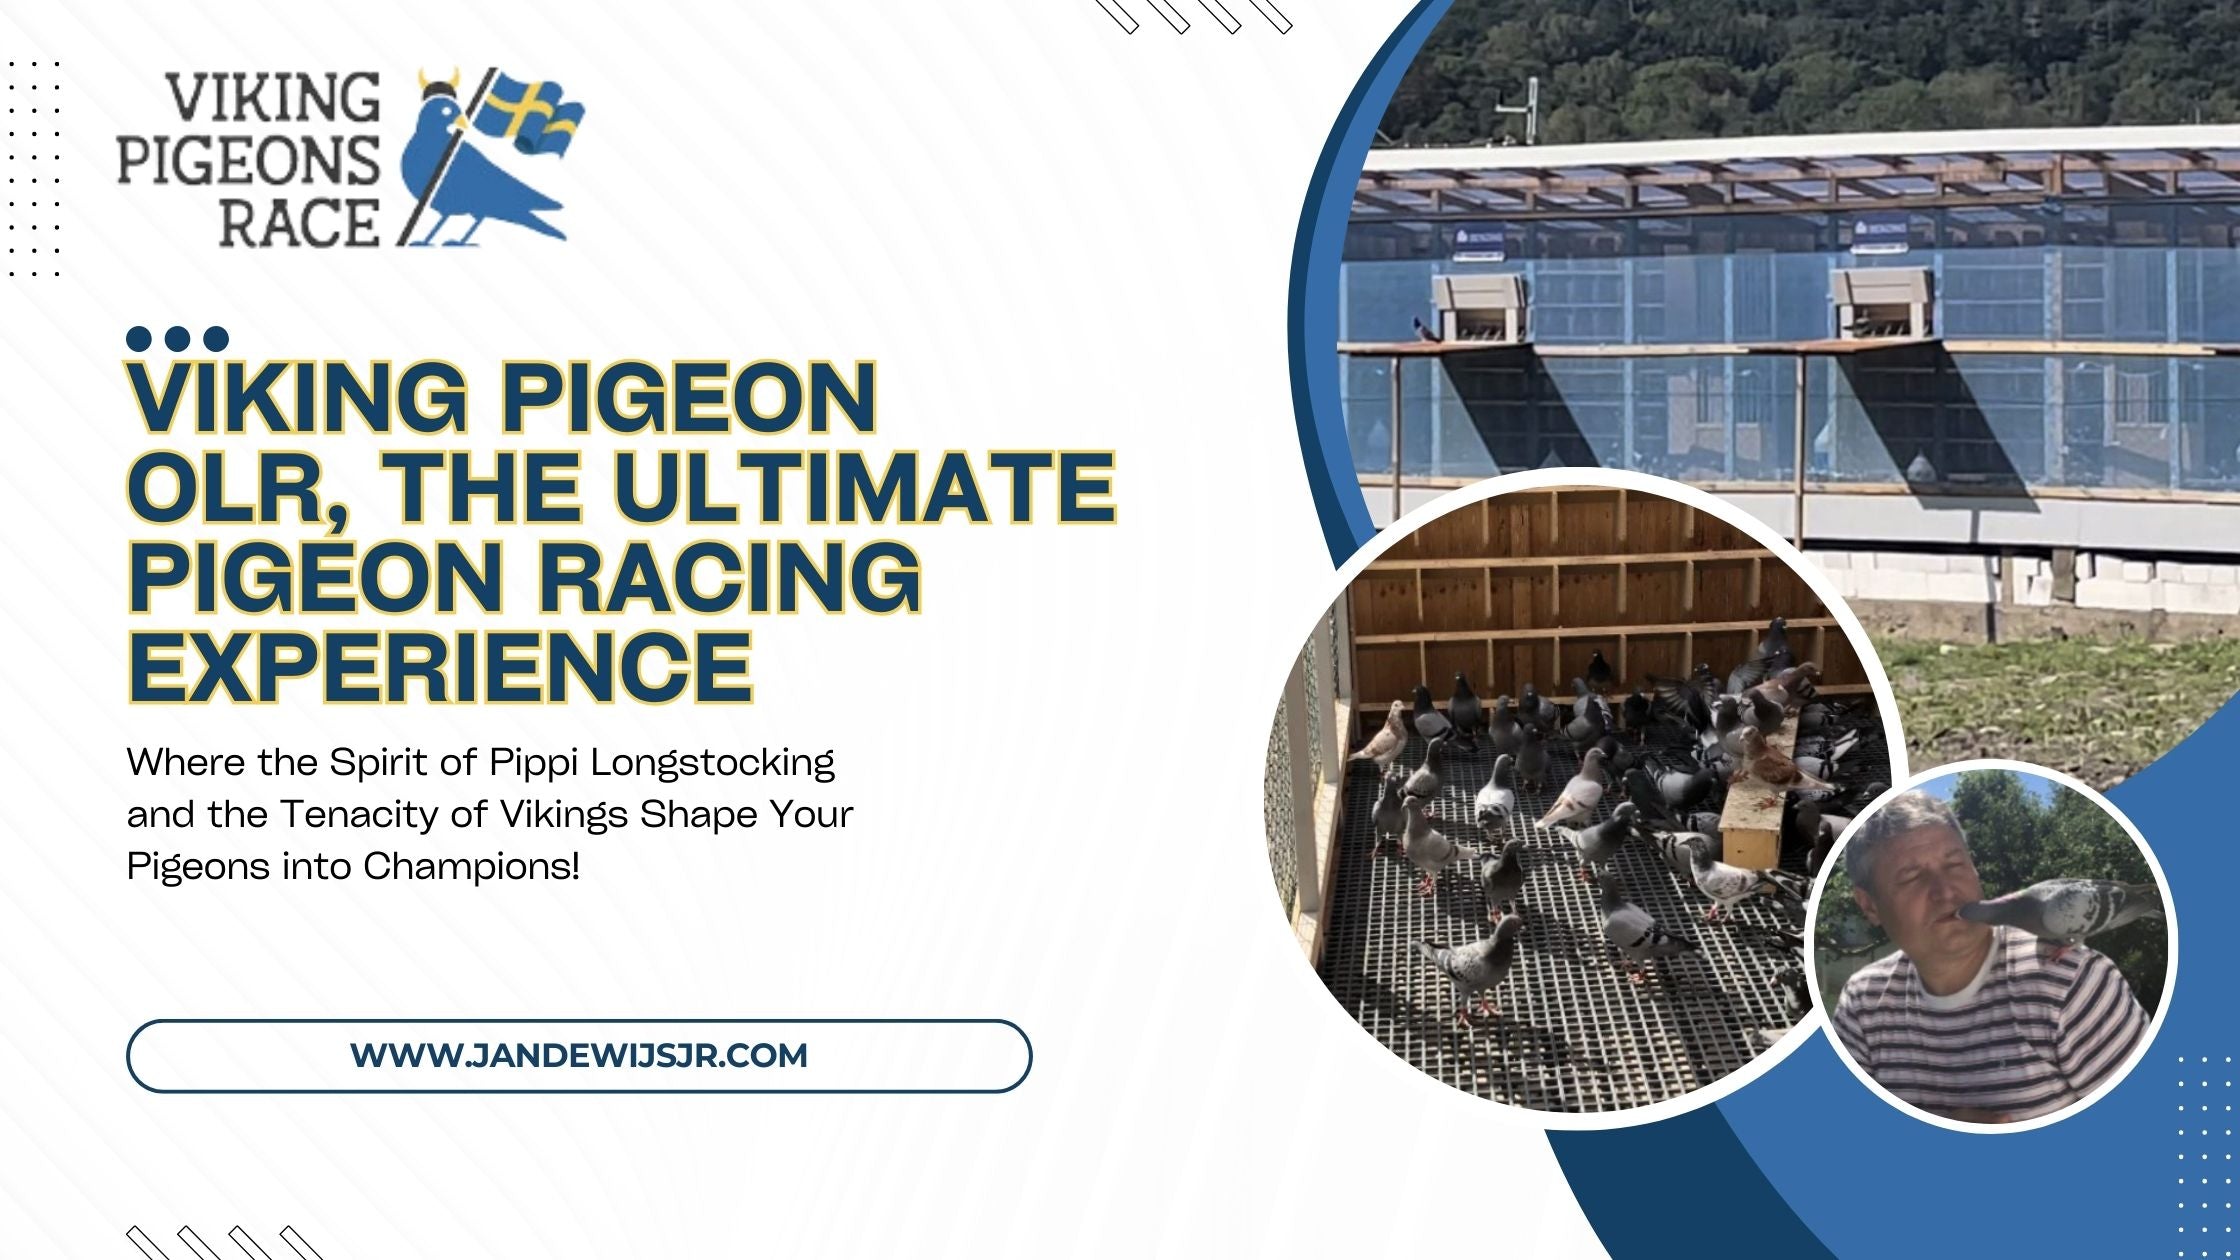 Viking Pigeon OLR, The Ultimate Pigeon Racing Experience